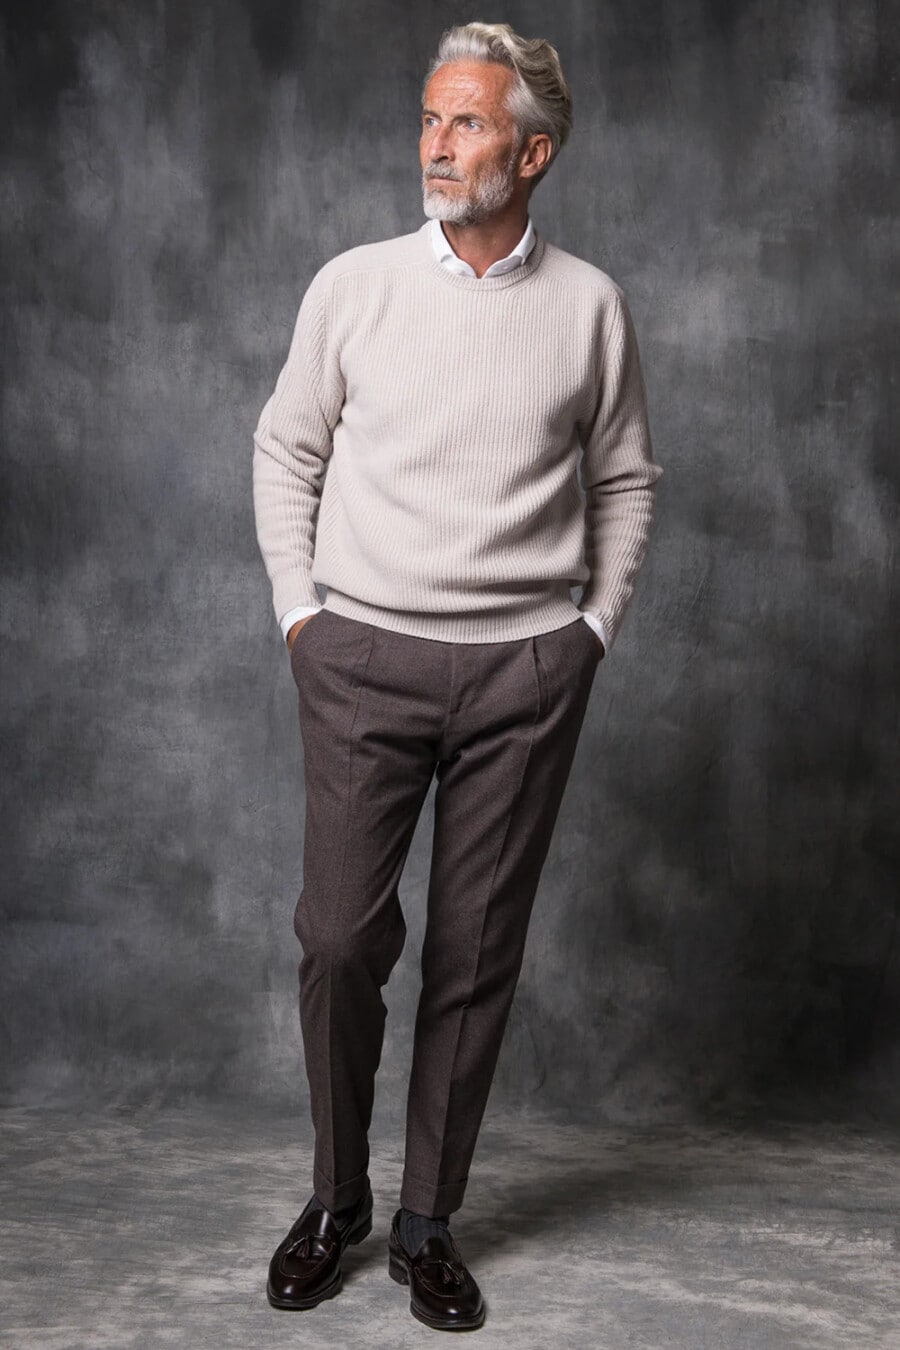 Men's tailored brown pants, white shirt, stone grey ribbed sweater, grey socks and brown leather tassel loafers outfit